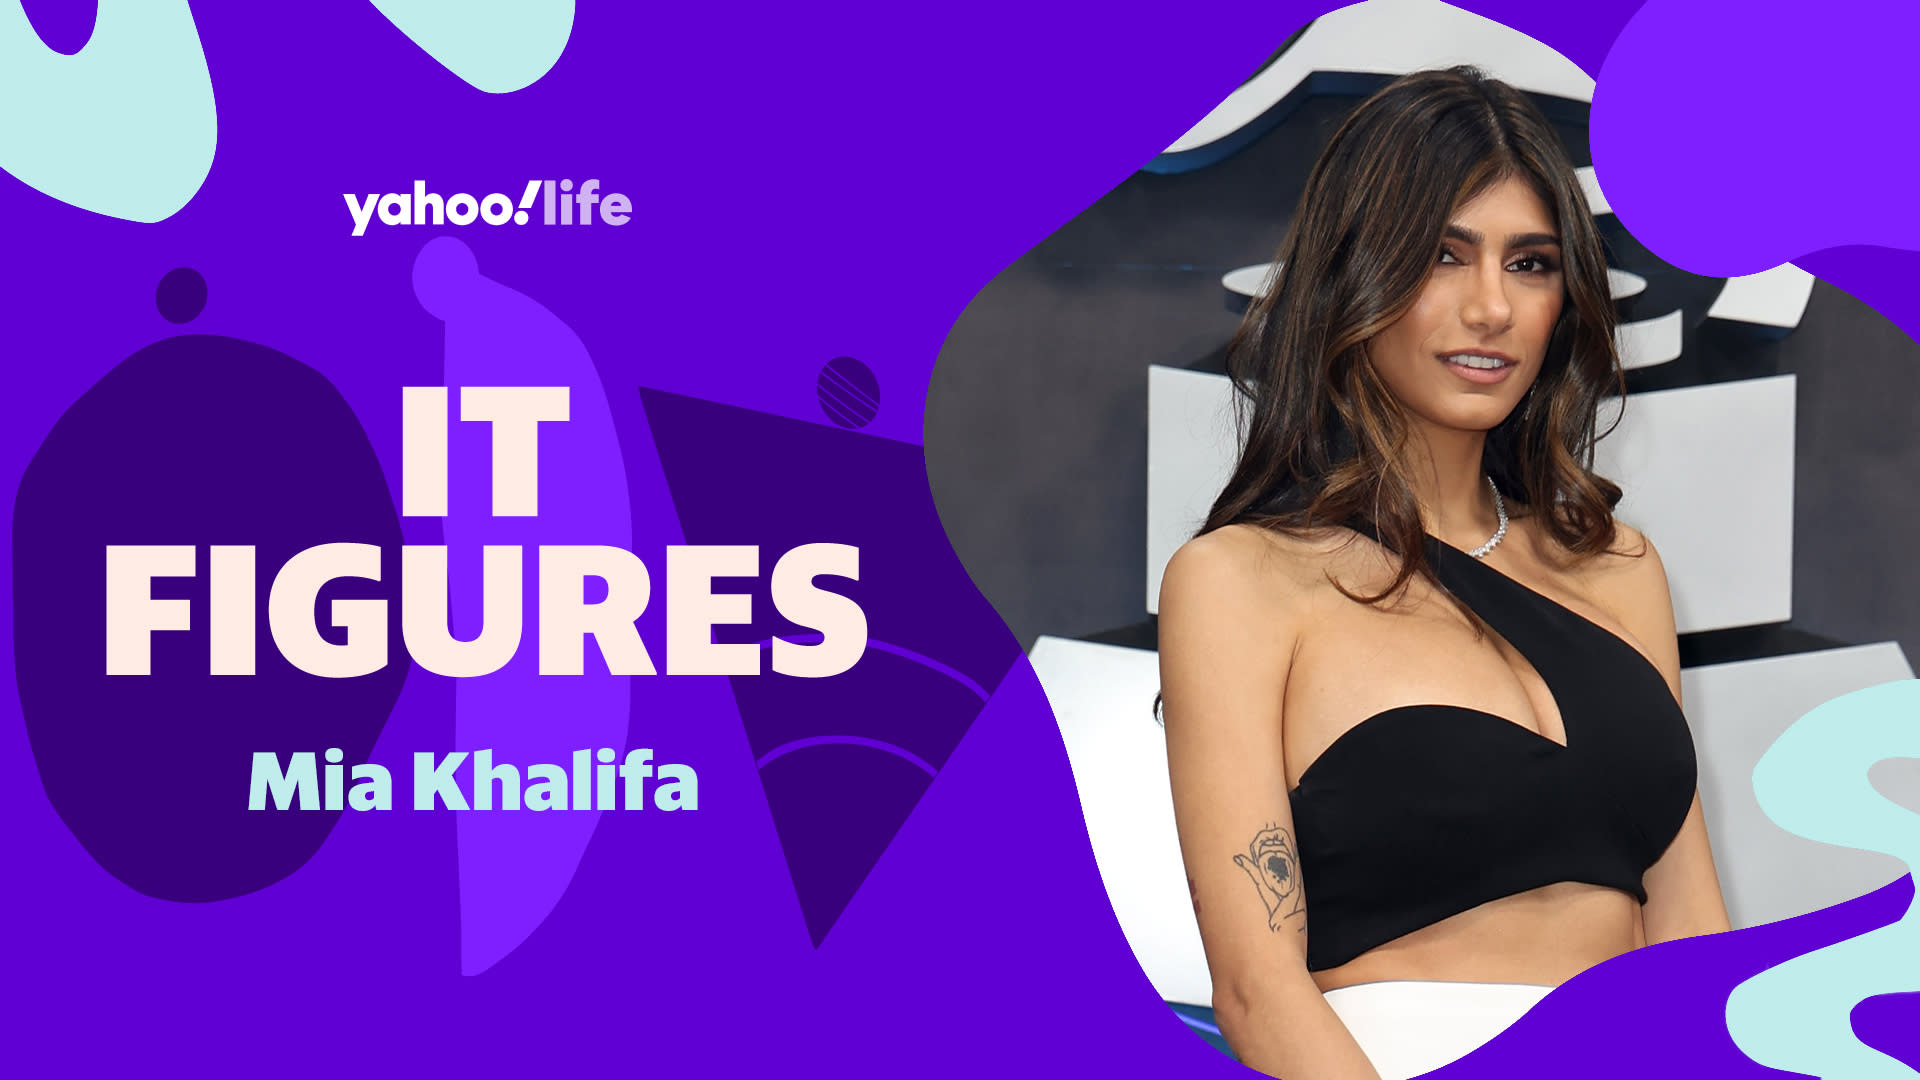 Mia Khalifa on why her work in the adult film industry wasnt a death sentence The difference is now, it is all for